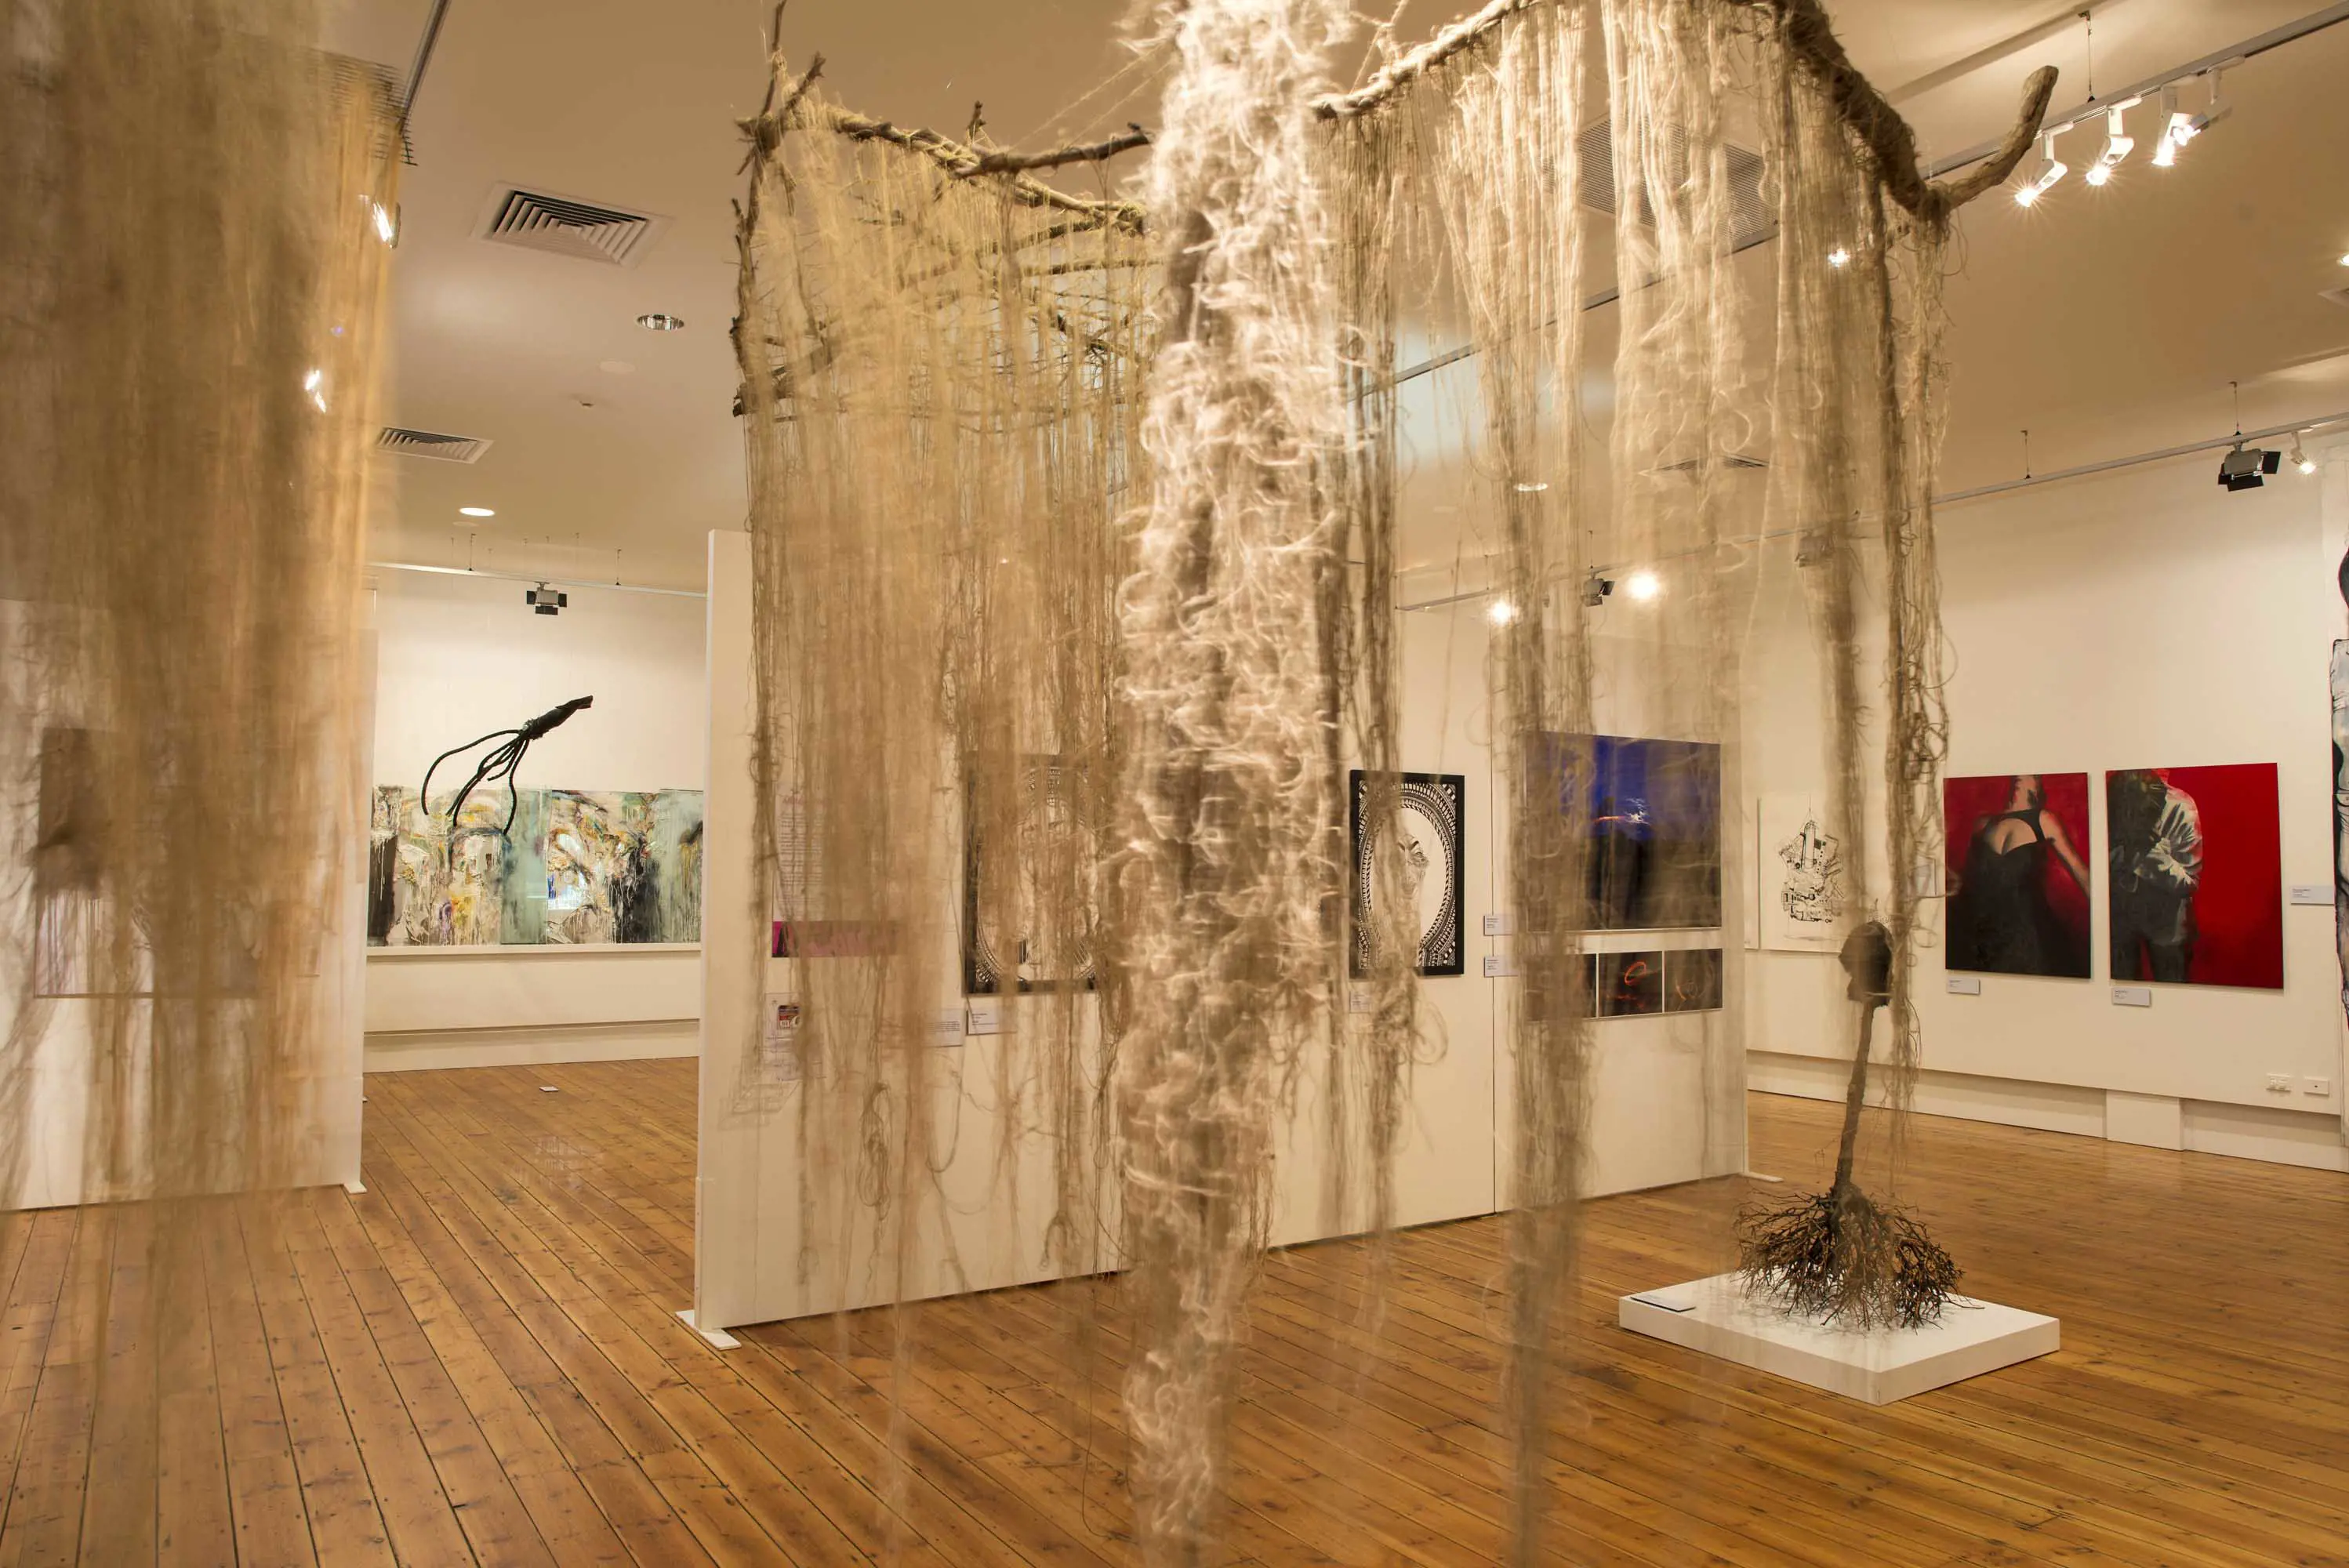 An artwork made from twine hangs from the ceiling of a gallery space with polished floorboards.